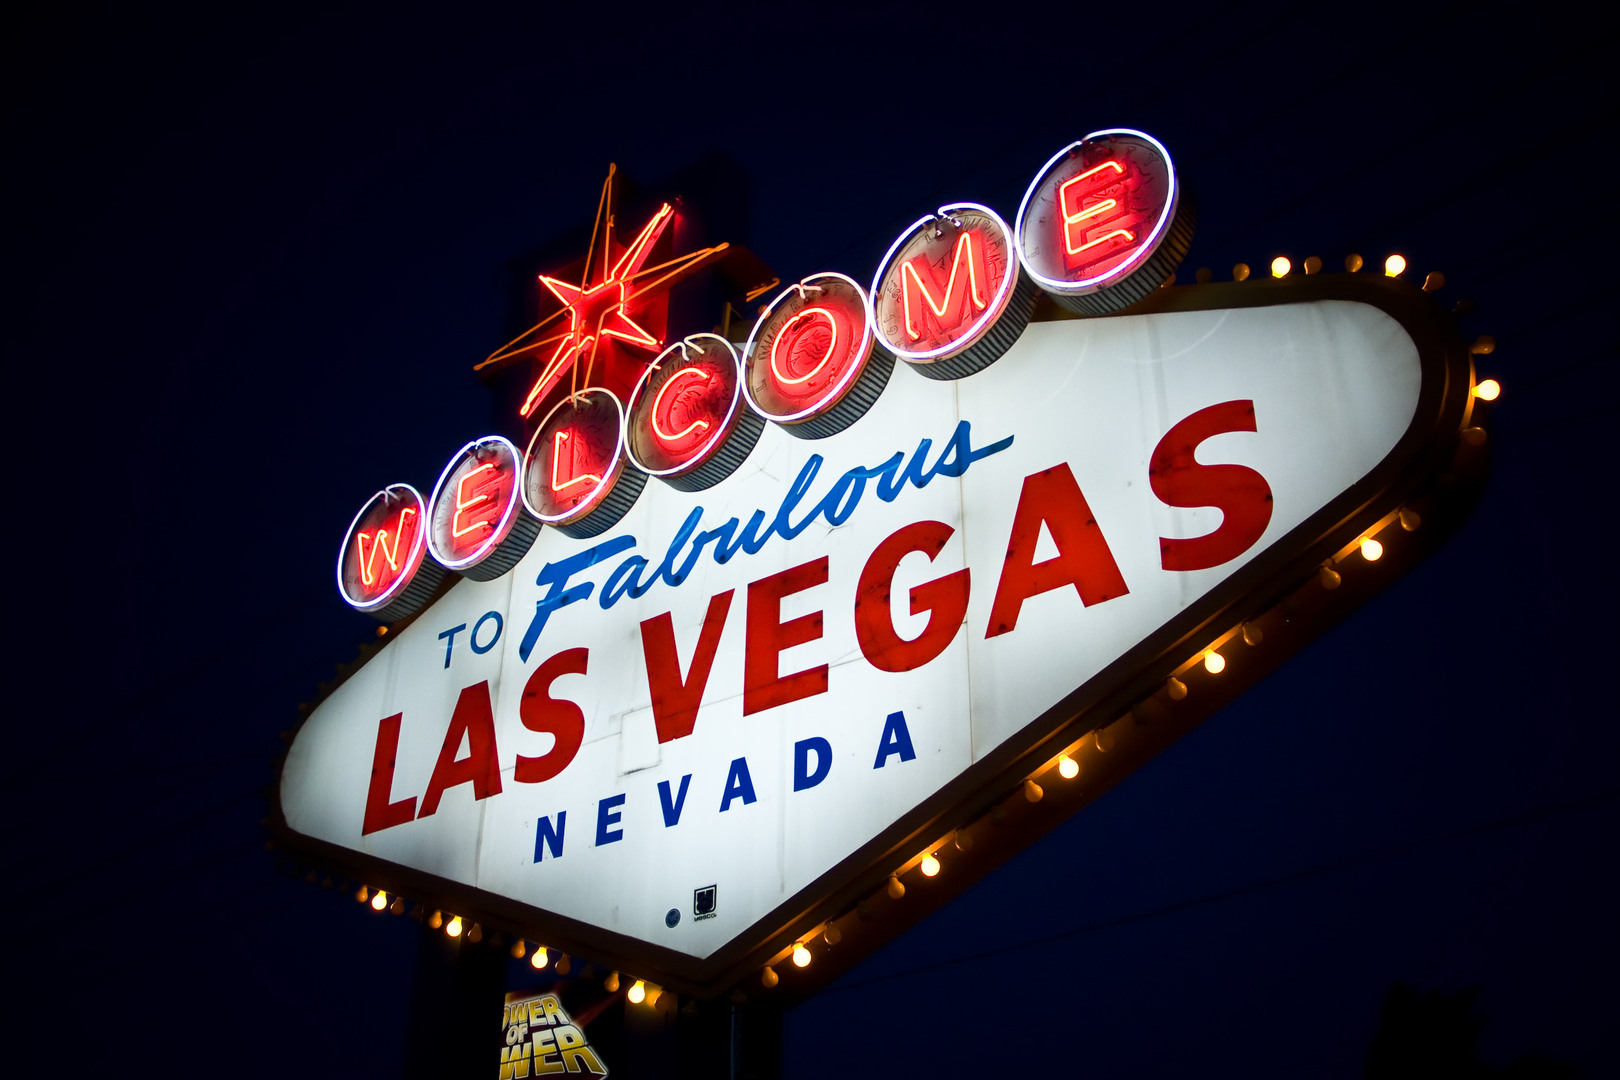 Las Vegas Selected as Destination for the Third Annual World Food Championships